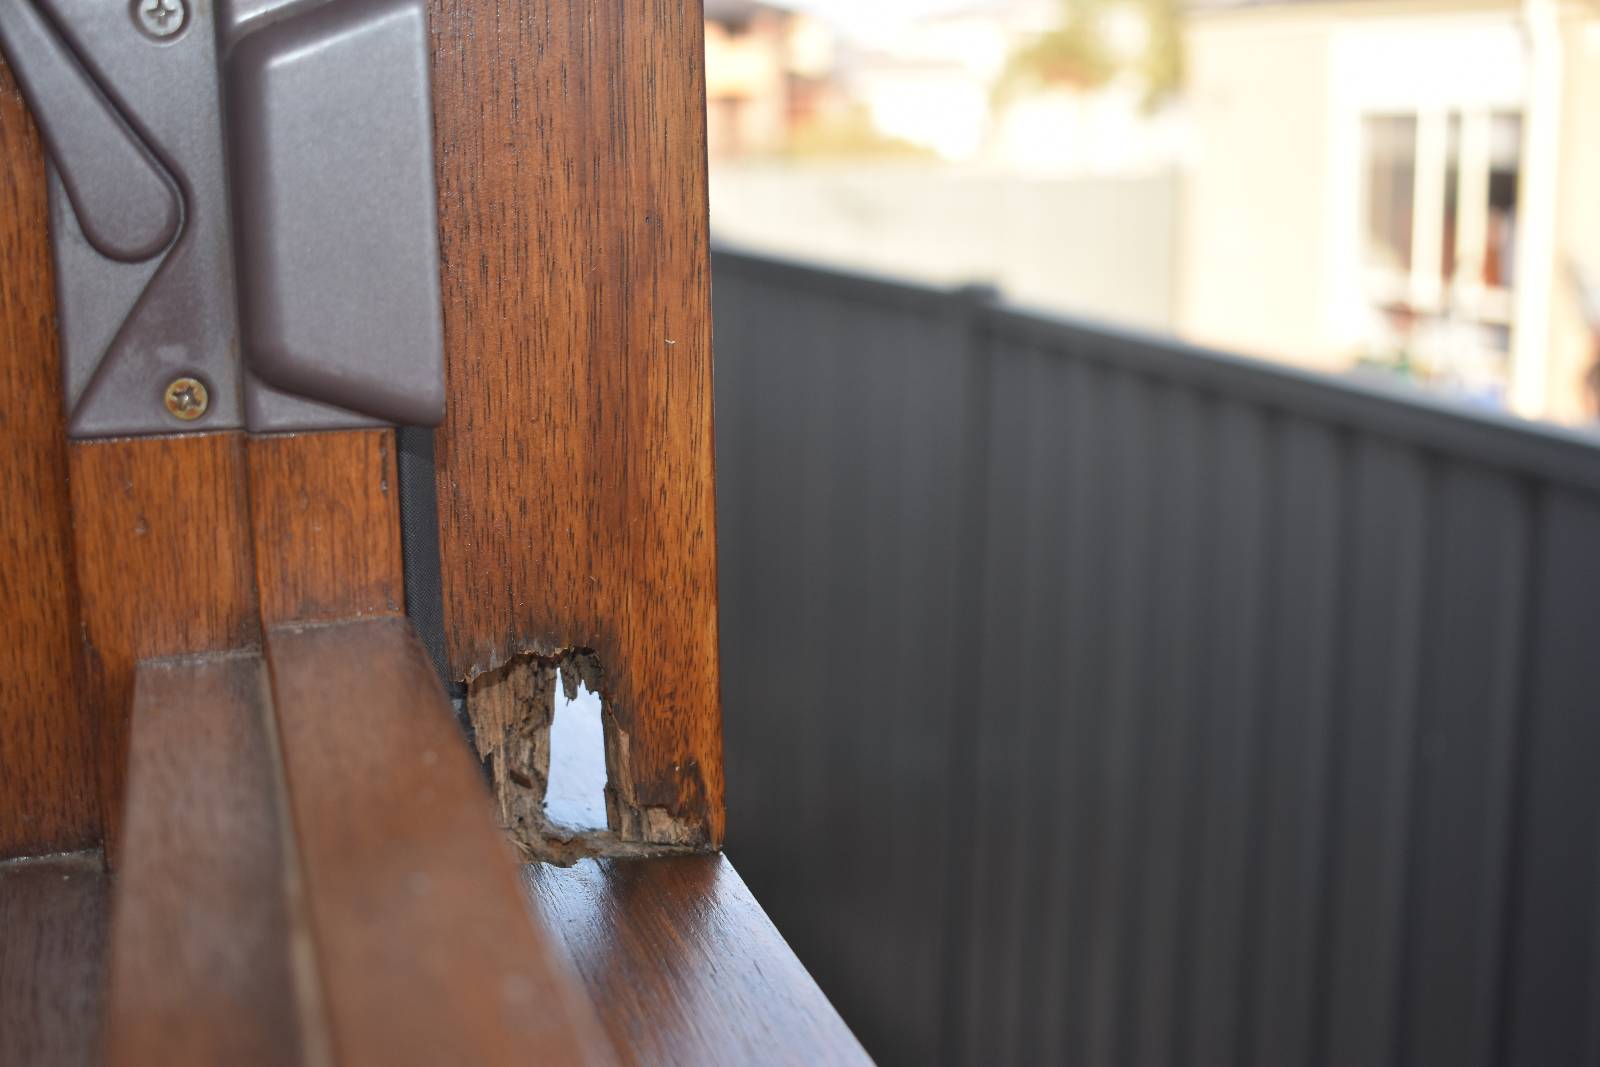 View: Wood rot on window frame